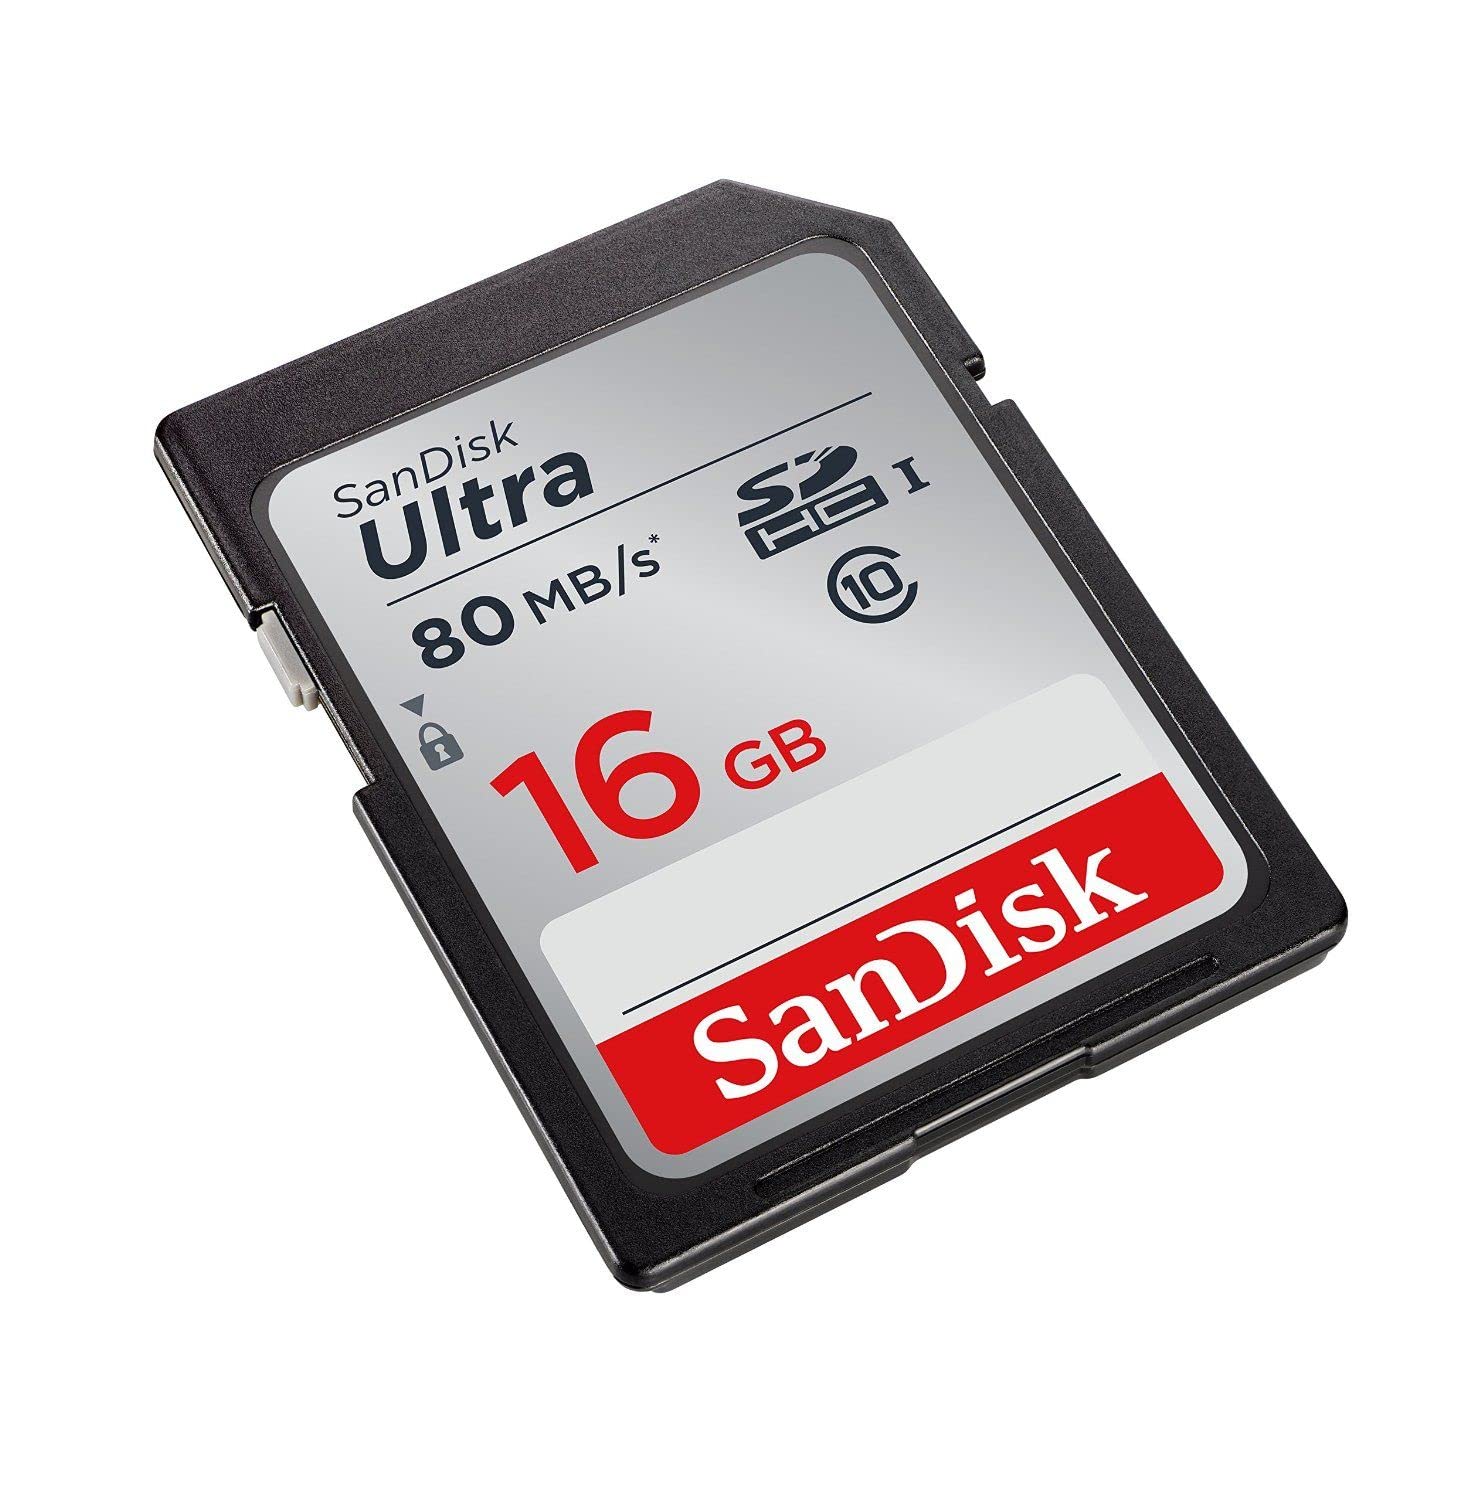 Remove the SD card from the device and reinsert it firmly
Make sure the SD card is compatible with the device